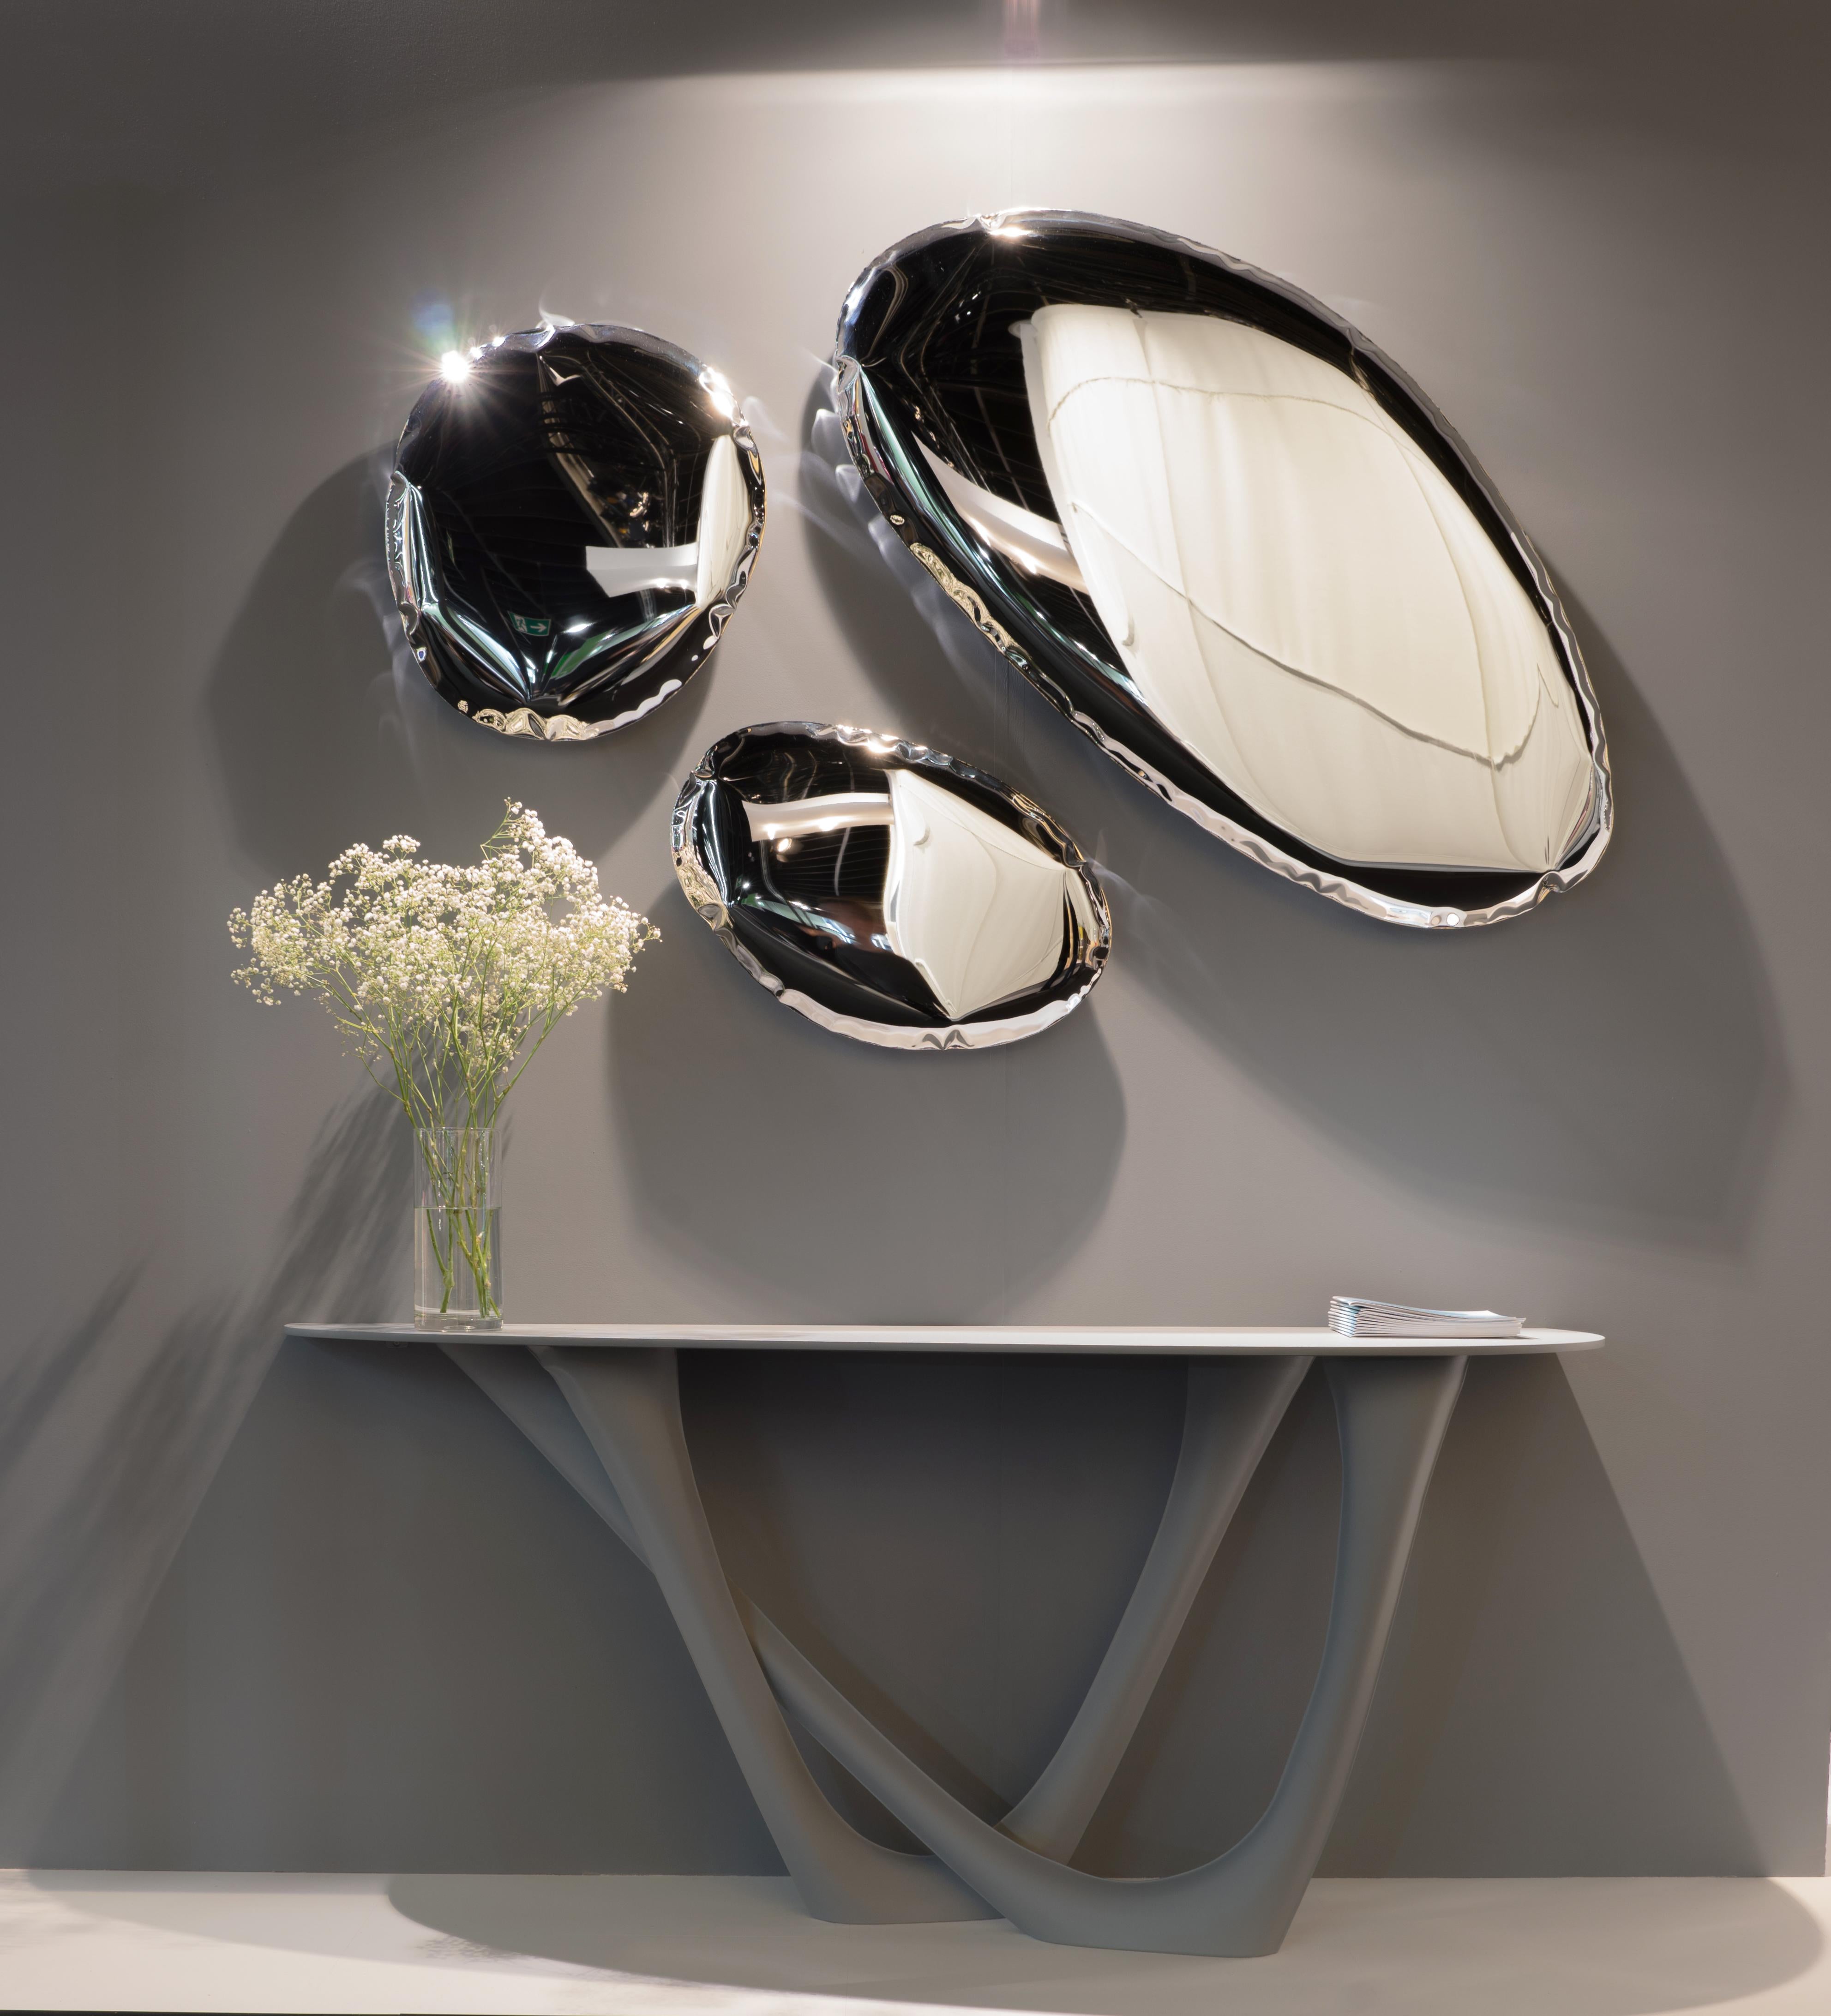 Tafla Q5 - Sculptural wall mirror - Zieta

Title: Tafla Q5

Material: polished stainless steel

Measures: 
H 2.37 in. x Dm 14.18 in.
H 6 cm x Dm 36 cm

Mirrors from Q series are simple, pure, well known geometric forms of sophisticated